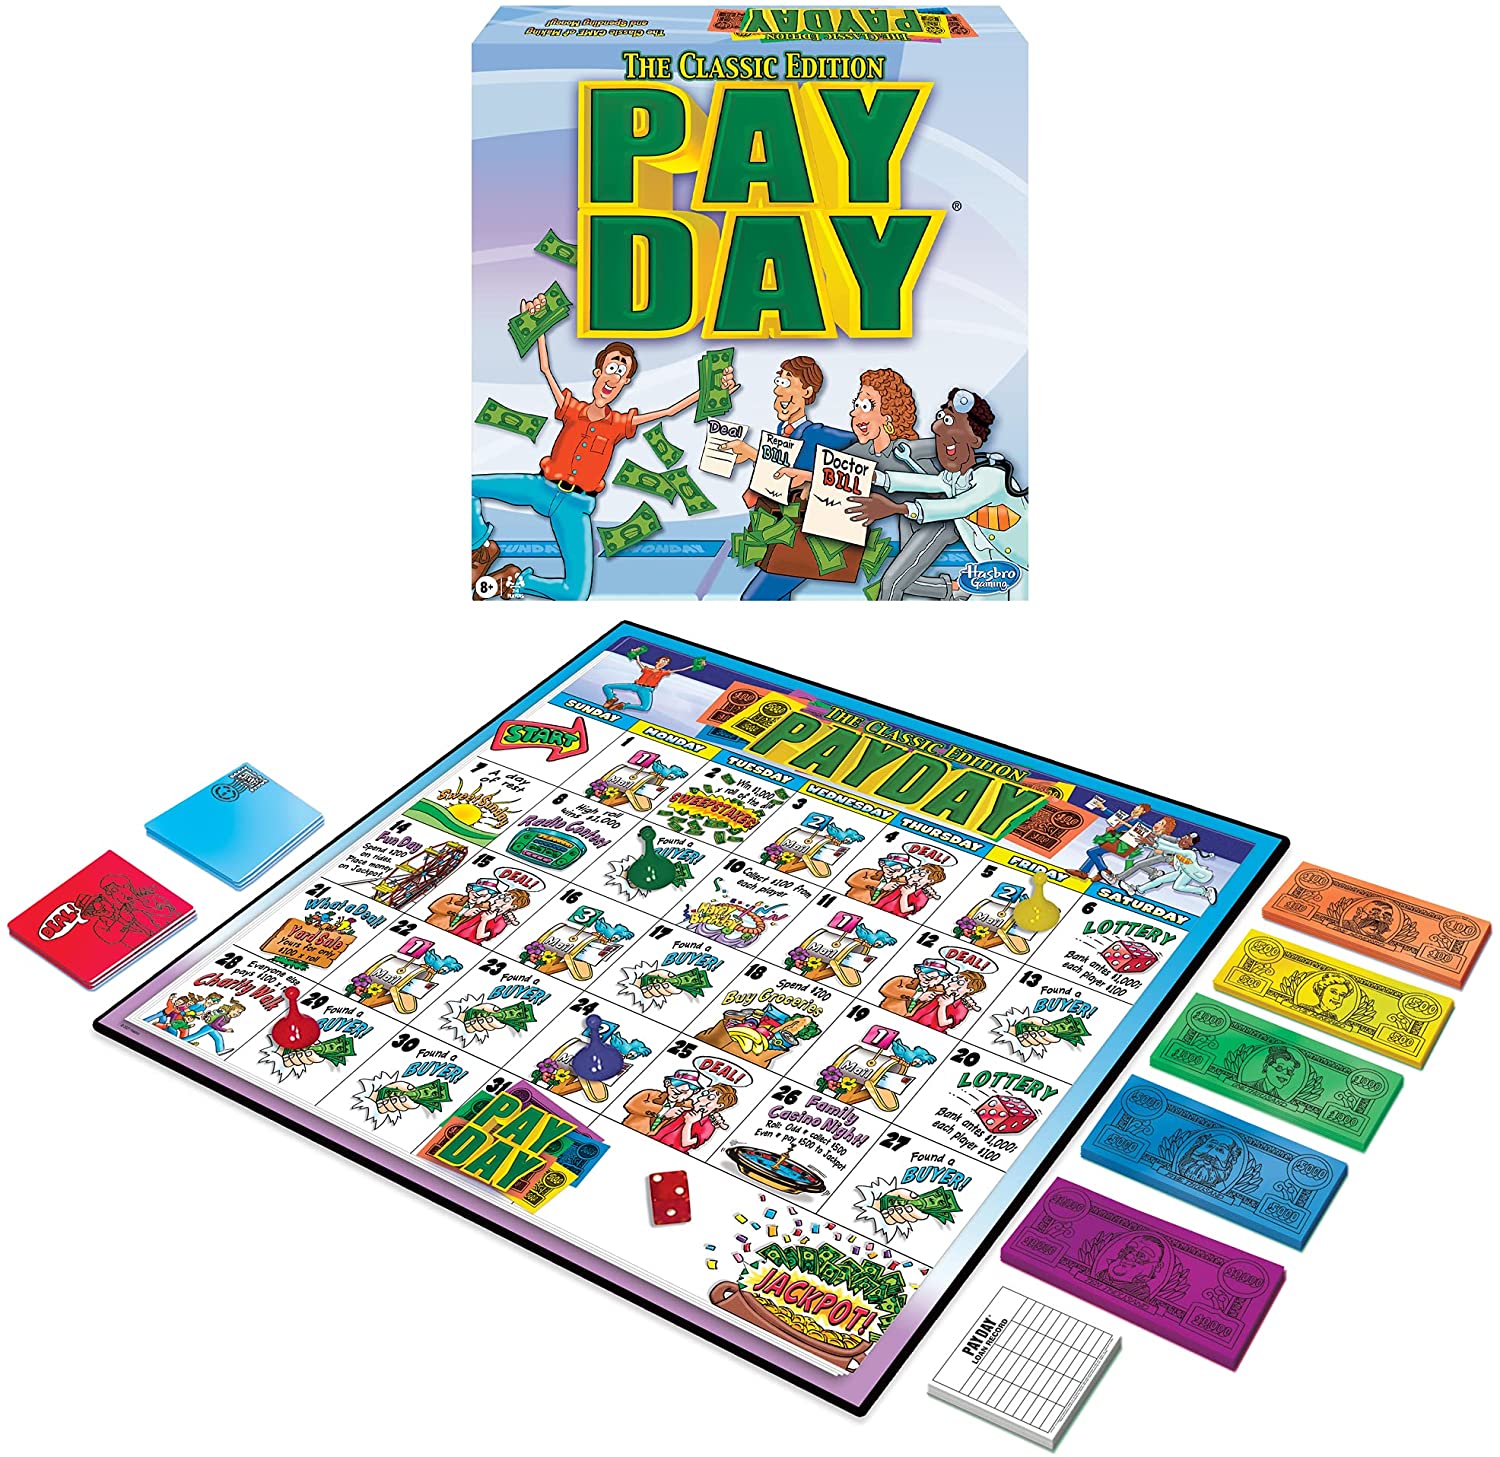 Pay Day by Hasbro